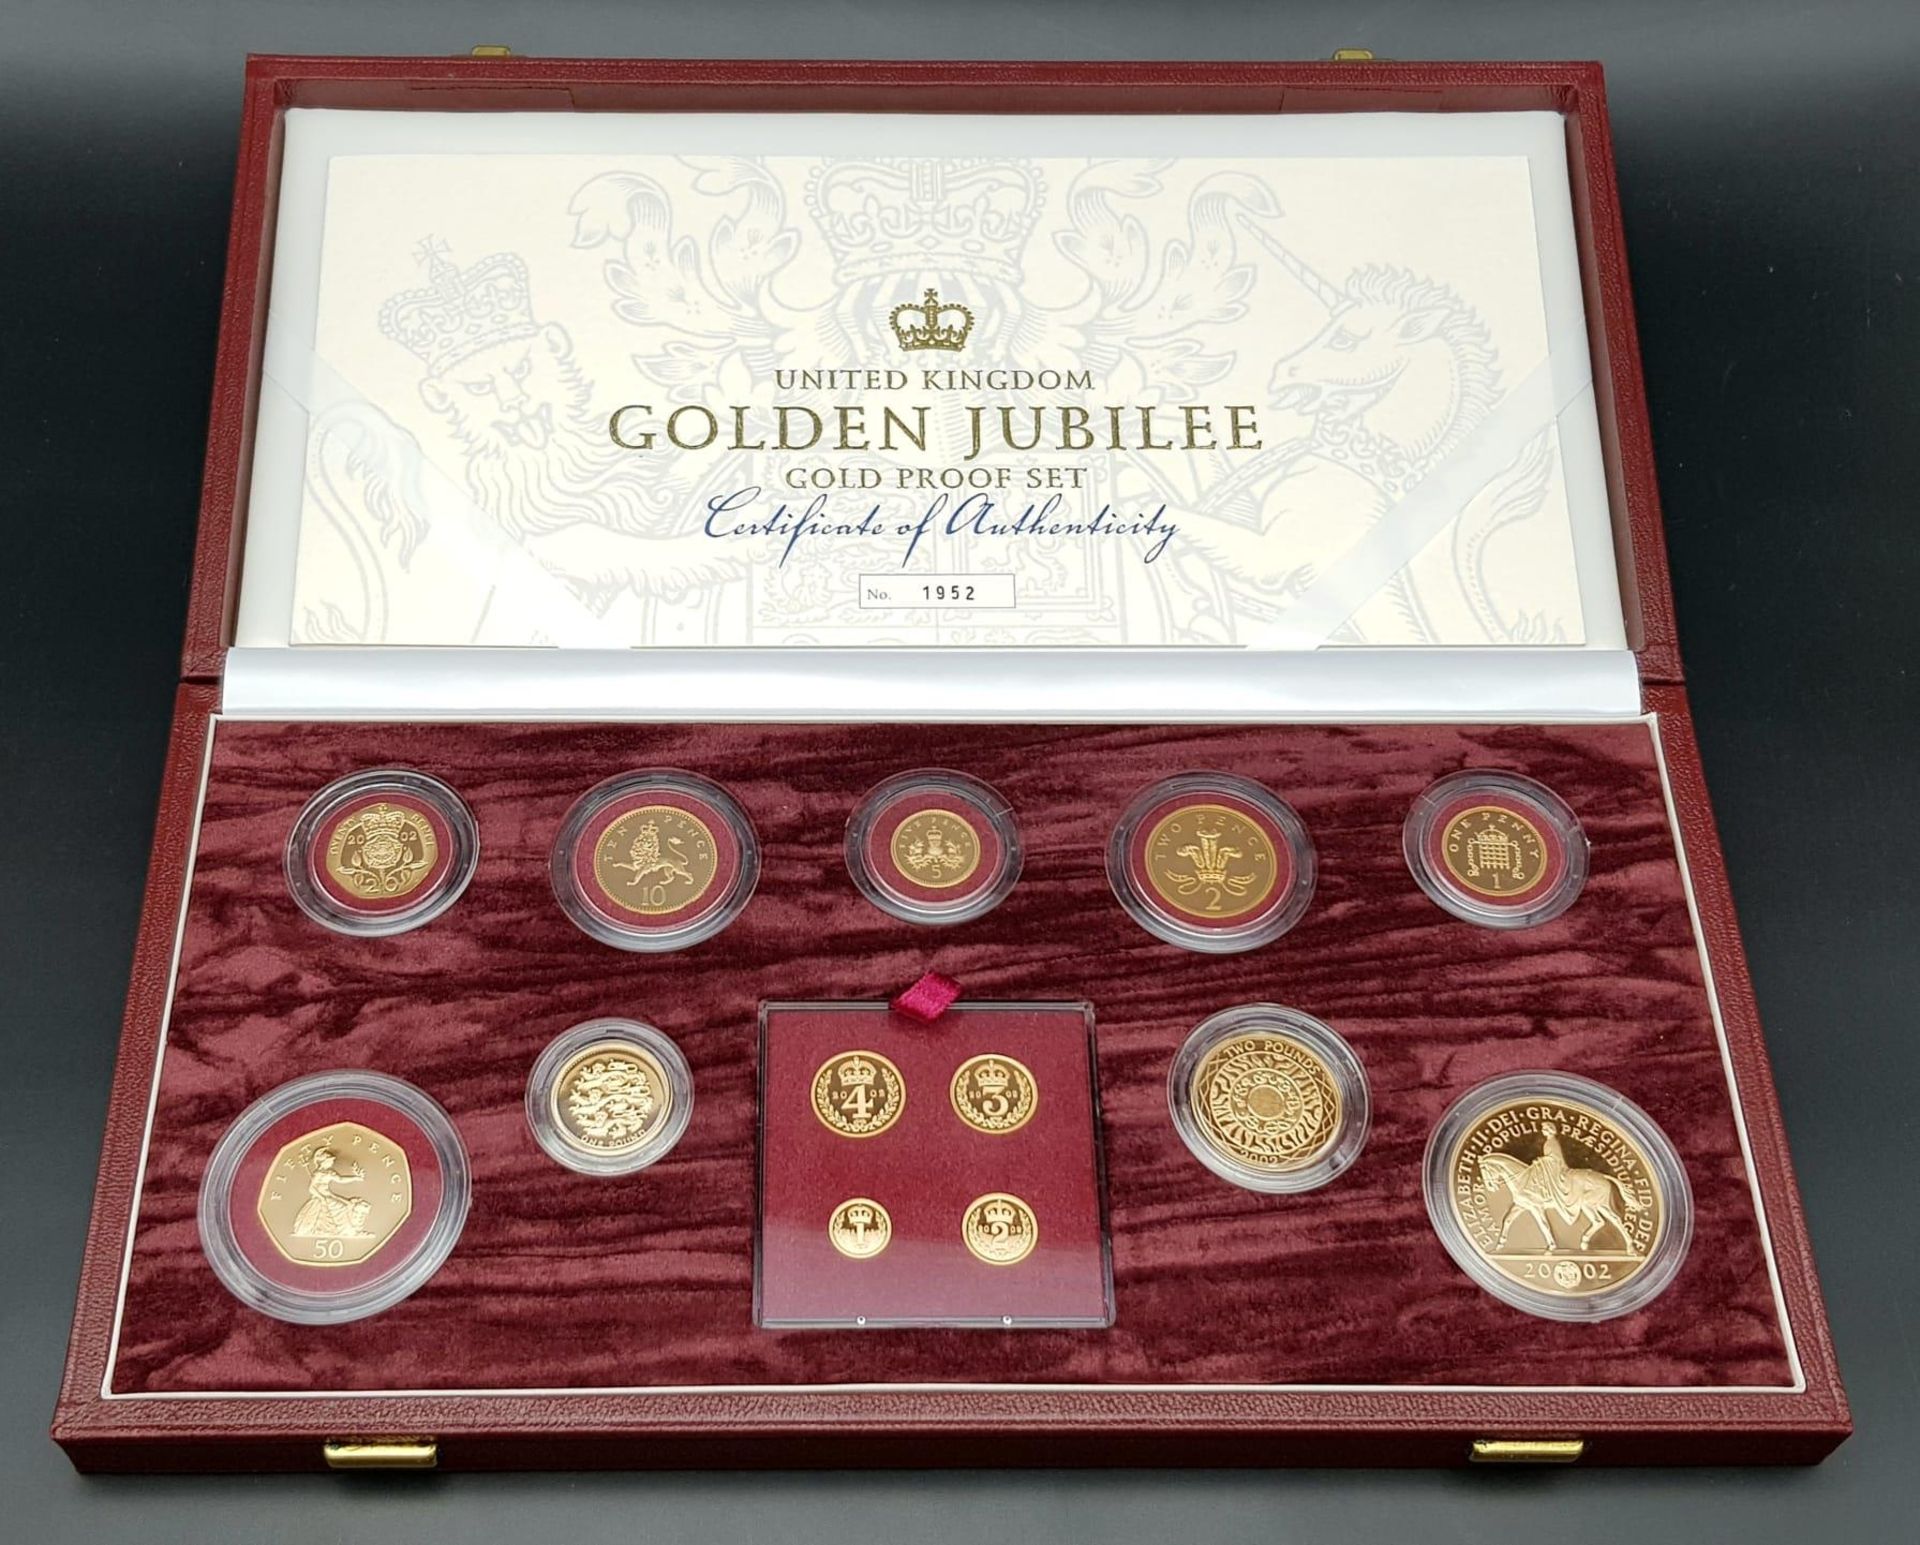 A Breathtaking Limited Edition 2002 Golden Jubilee 22K Gold Proof Coin Set. This set contains a